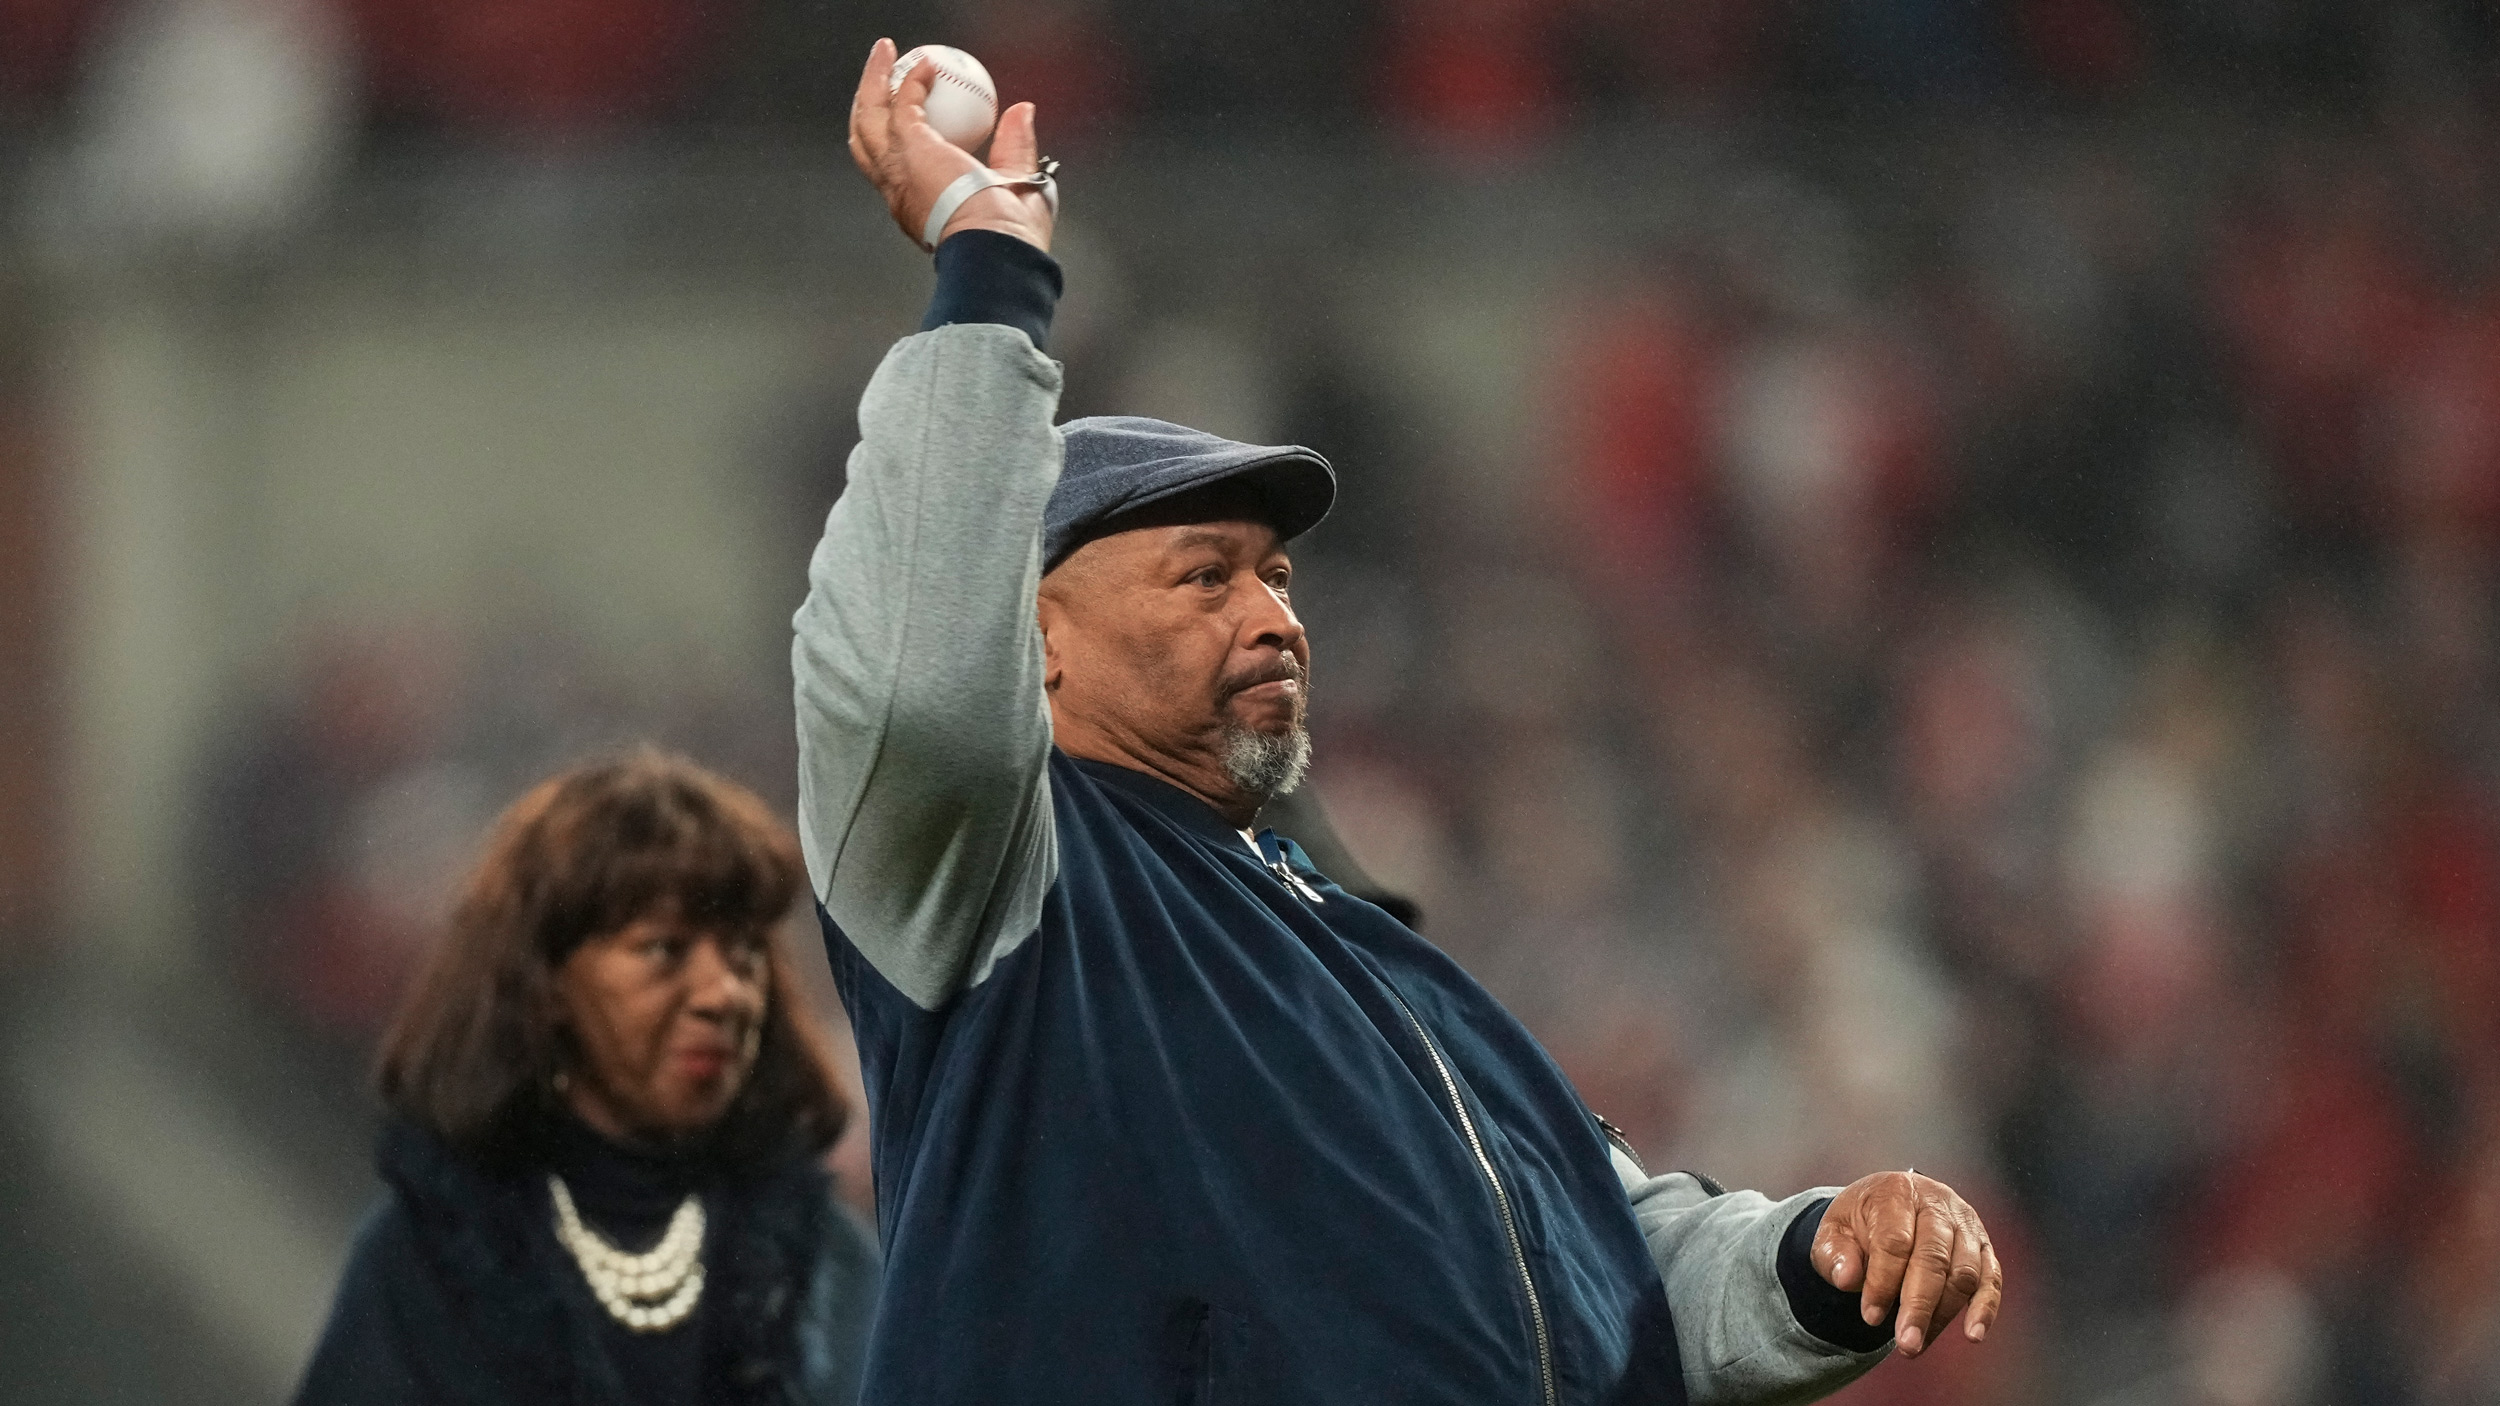 Hank Aaron Jr. throws out the ceremonial first pitch before Game 3 of baseball's World Series between the Houston Astros and the Atlanta Braves on October 29 in Atlanta.